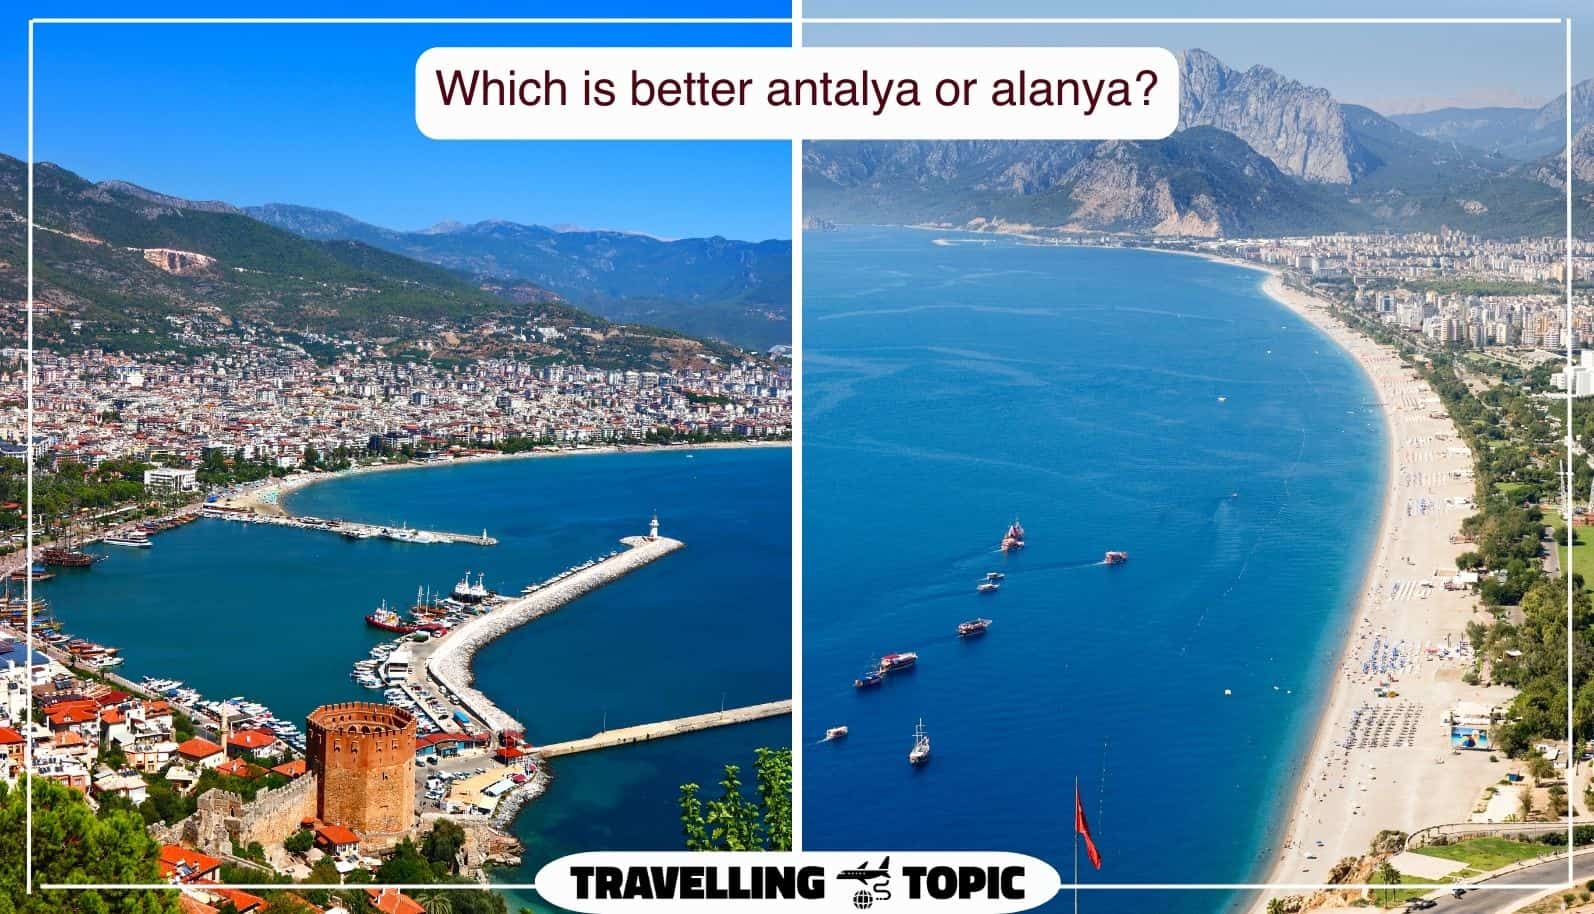 Which is better antalya or alanya